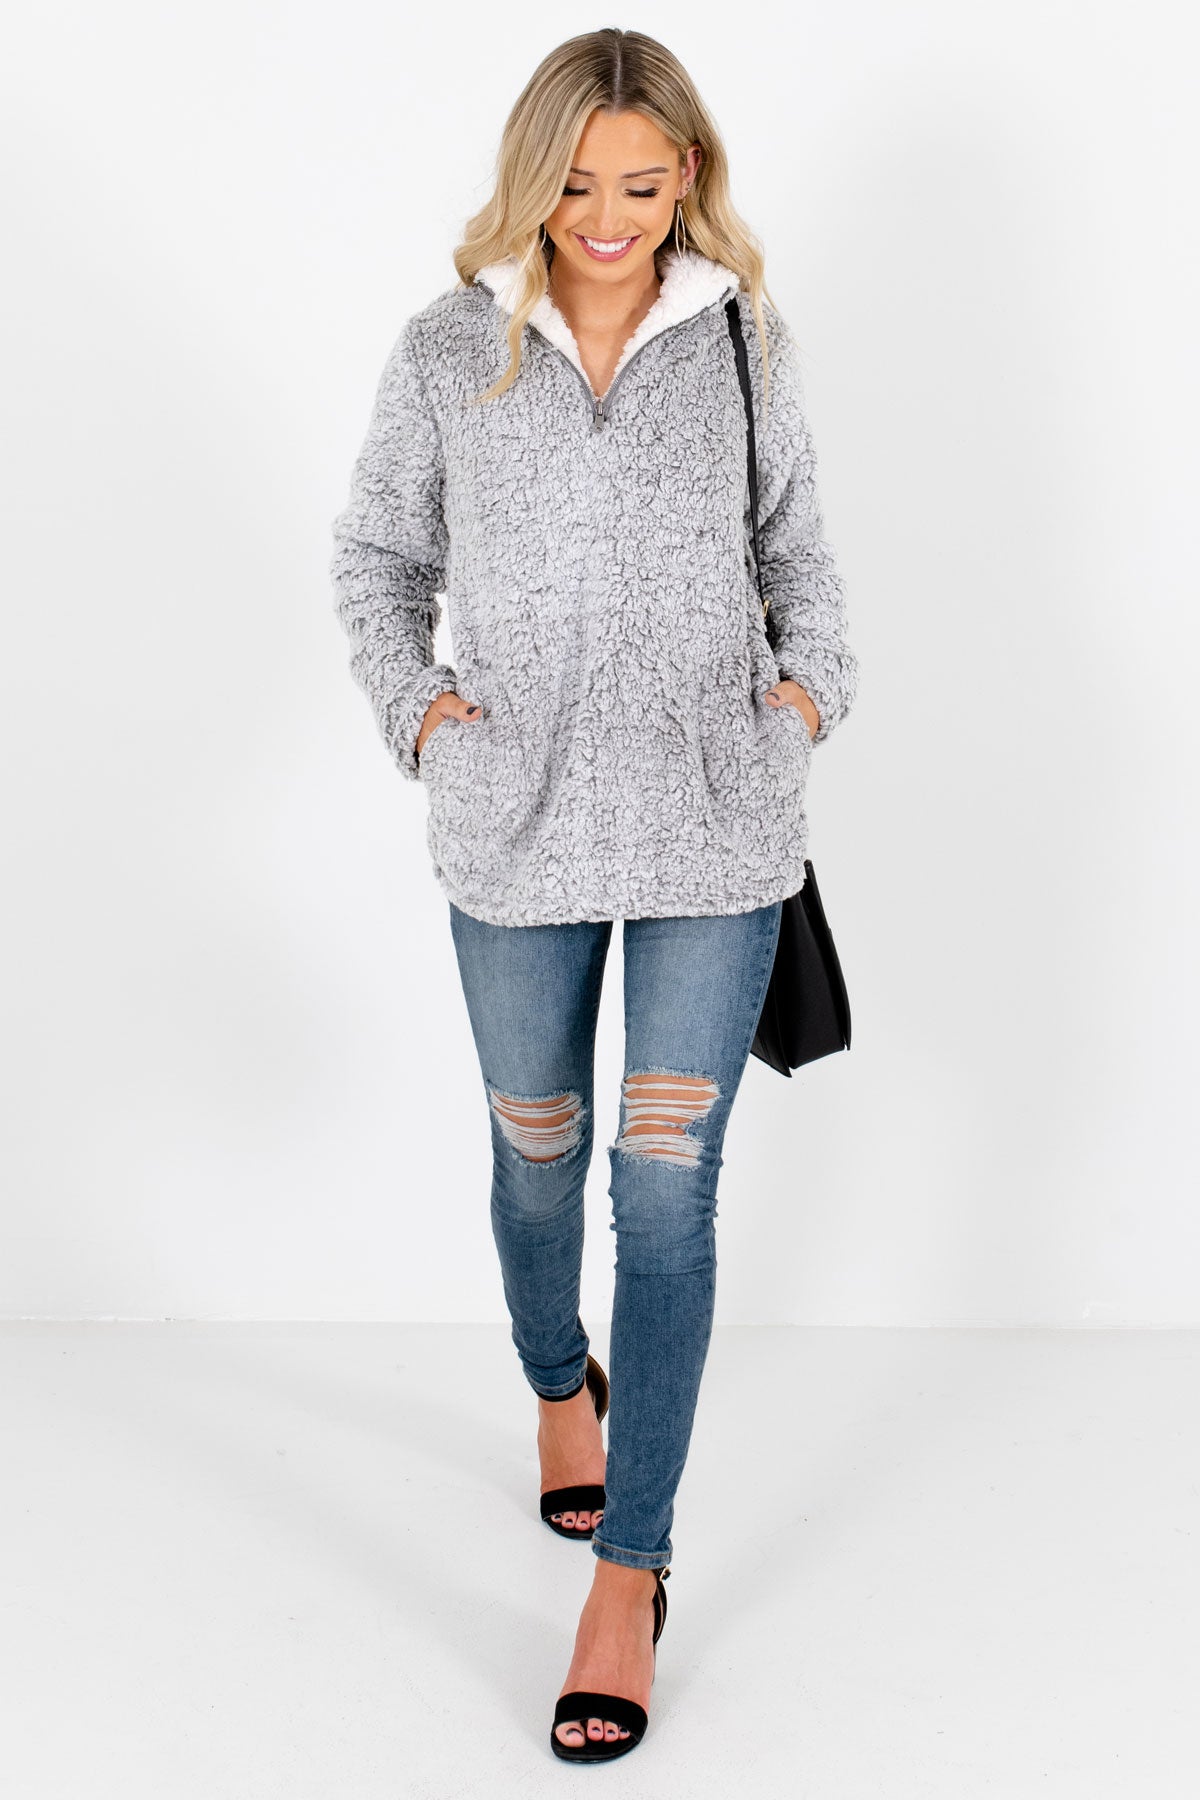 Women's Gray Fall and Winter Boutique Clothing